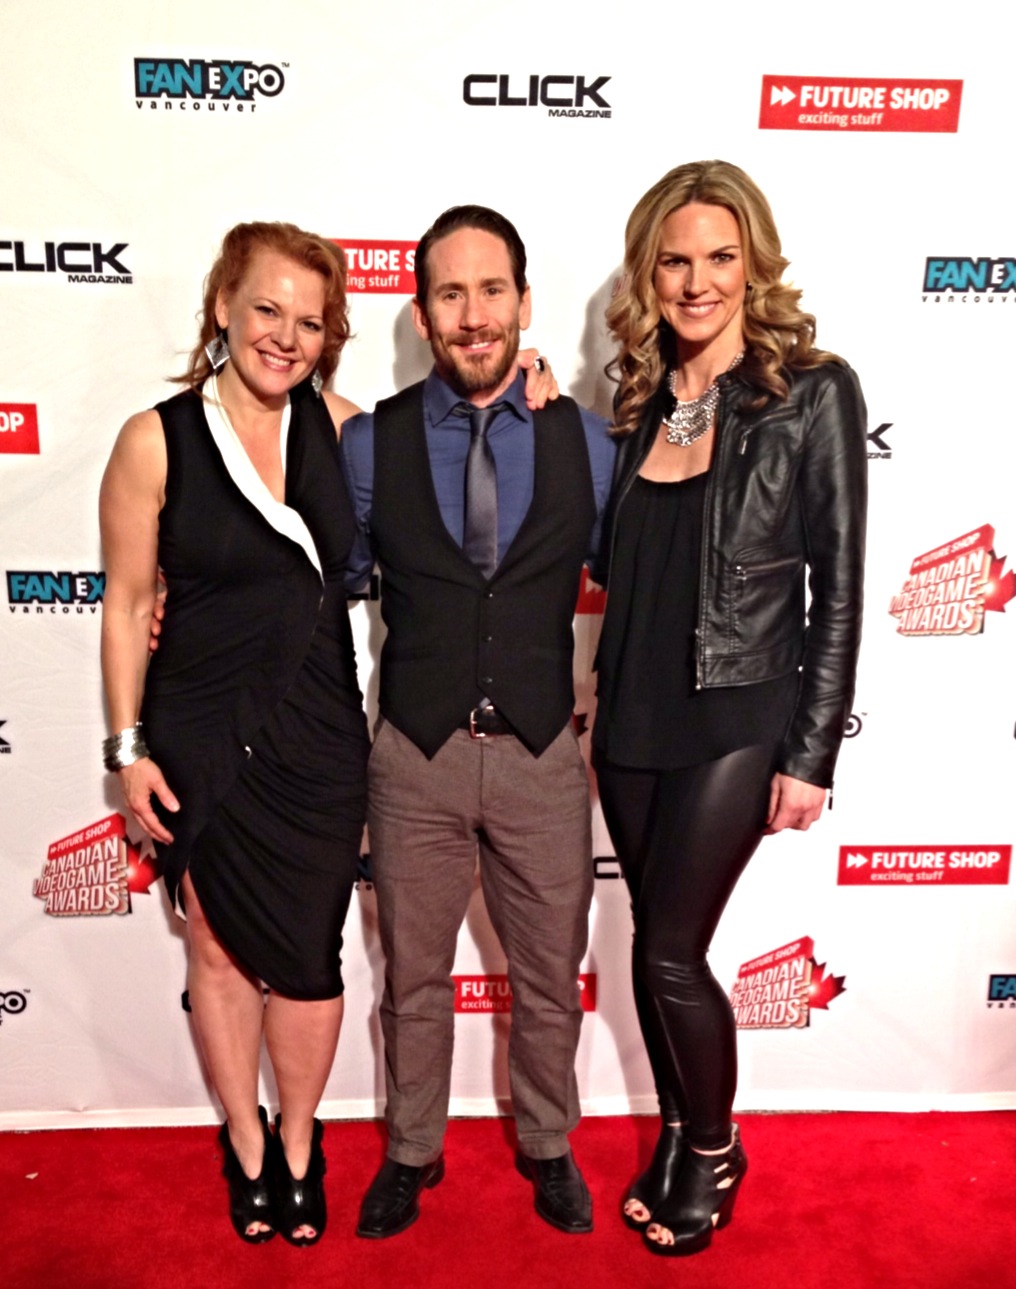 Paula Jean Hixon, Neil Napier and Kate Drummond at the Canadian Video Game Awards